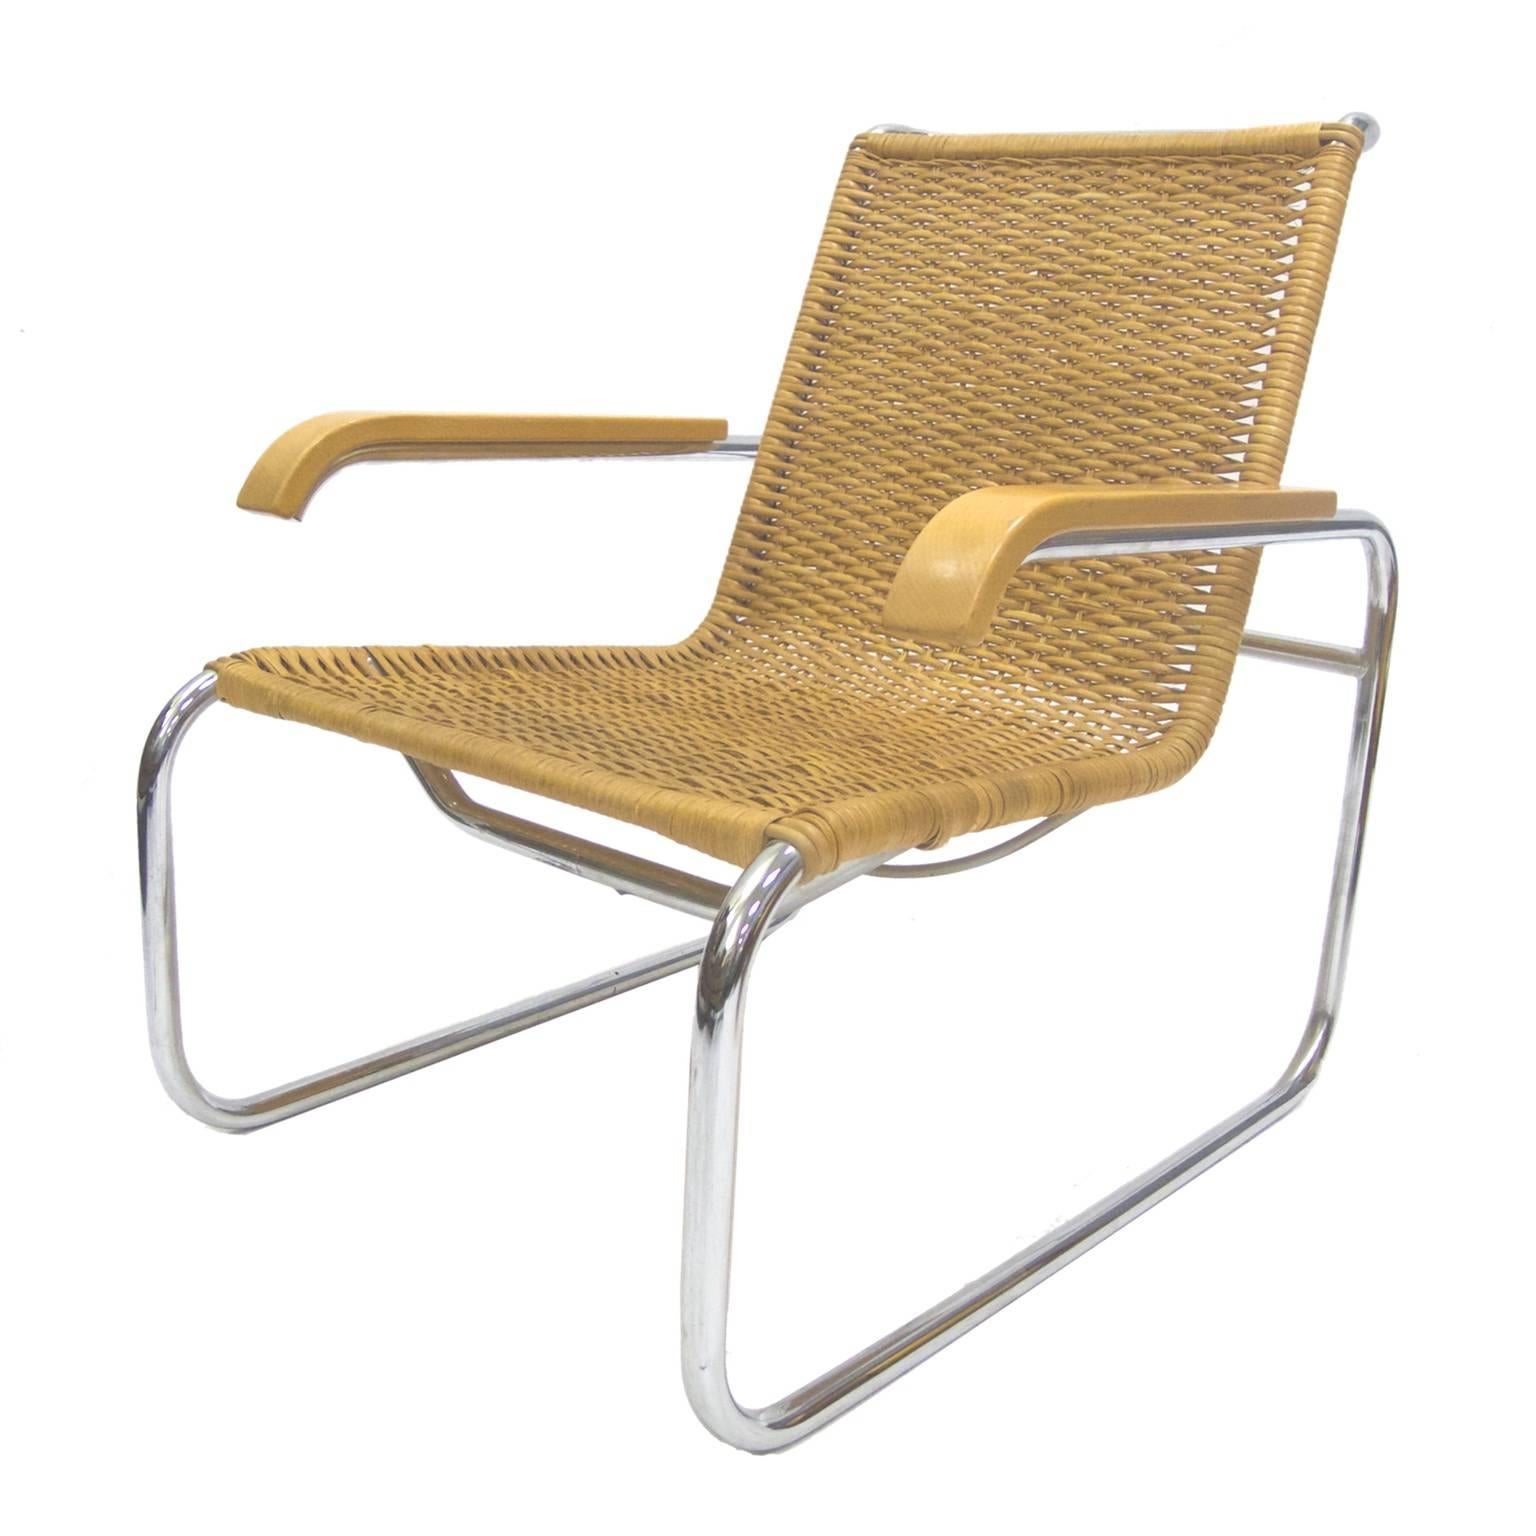 Bauhaus Marcel Breuer B 35 Lounge Chair for Thonet in Chrome and Woven Rattan